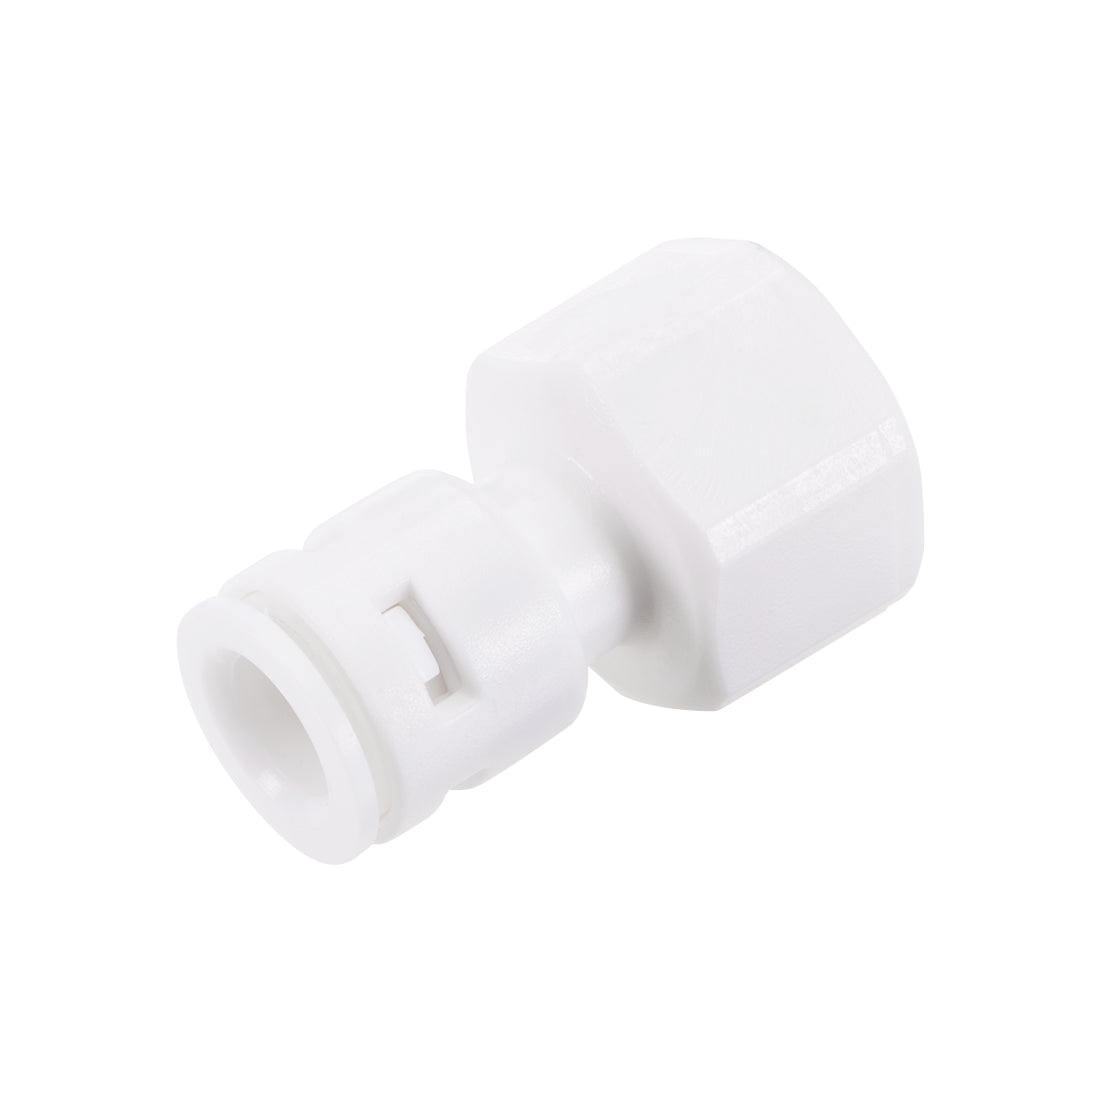 uxcell Uxcell Quick Connector G1/2 Female Thread to 3/8" Tube, Straight Connect Fittings for Water Purifier, 41mm White 5Pcs